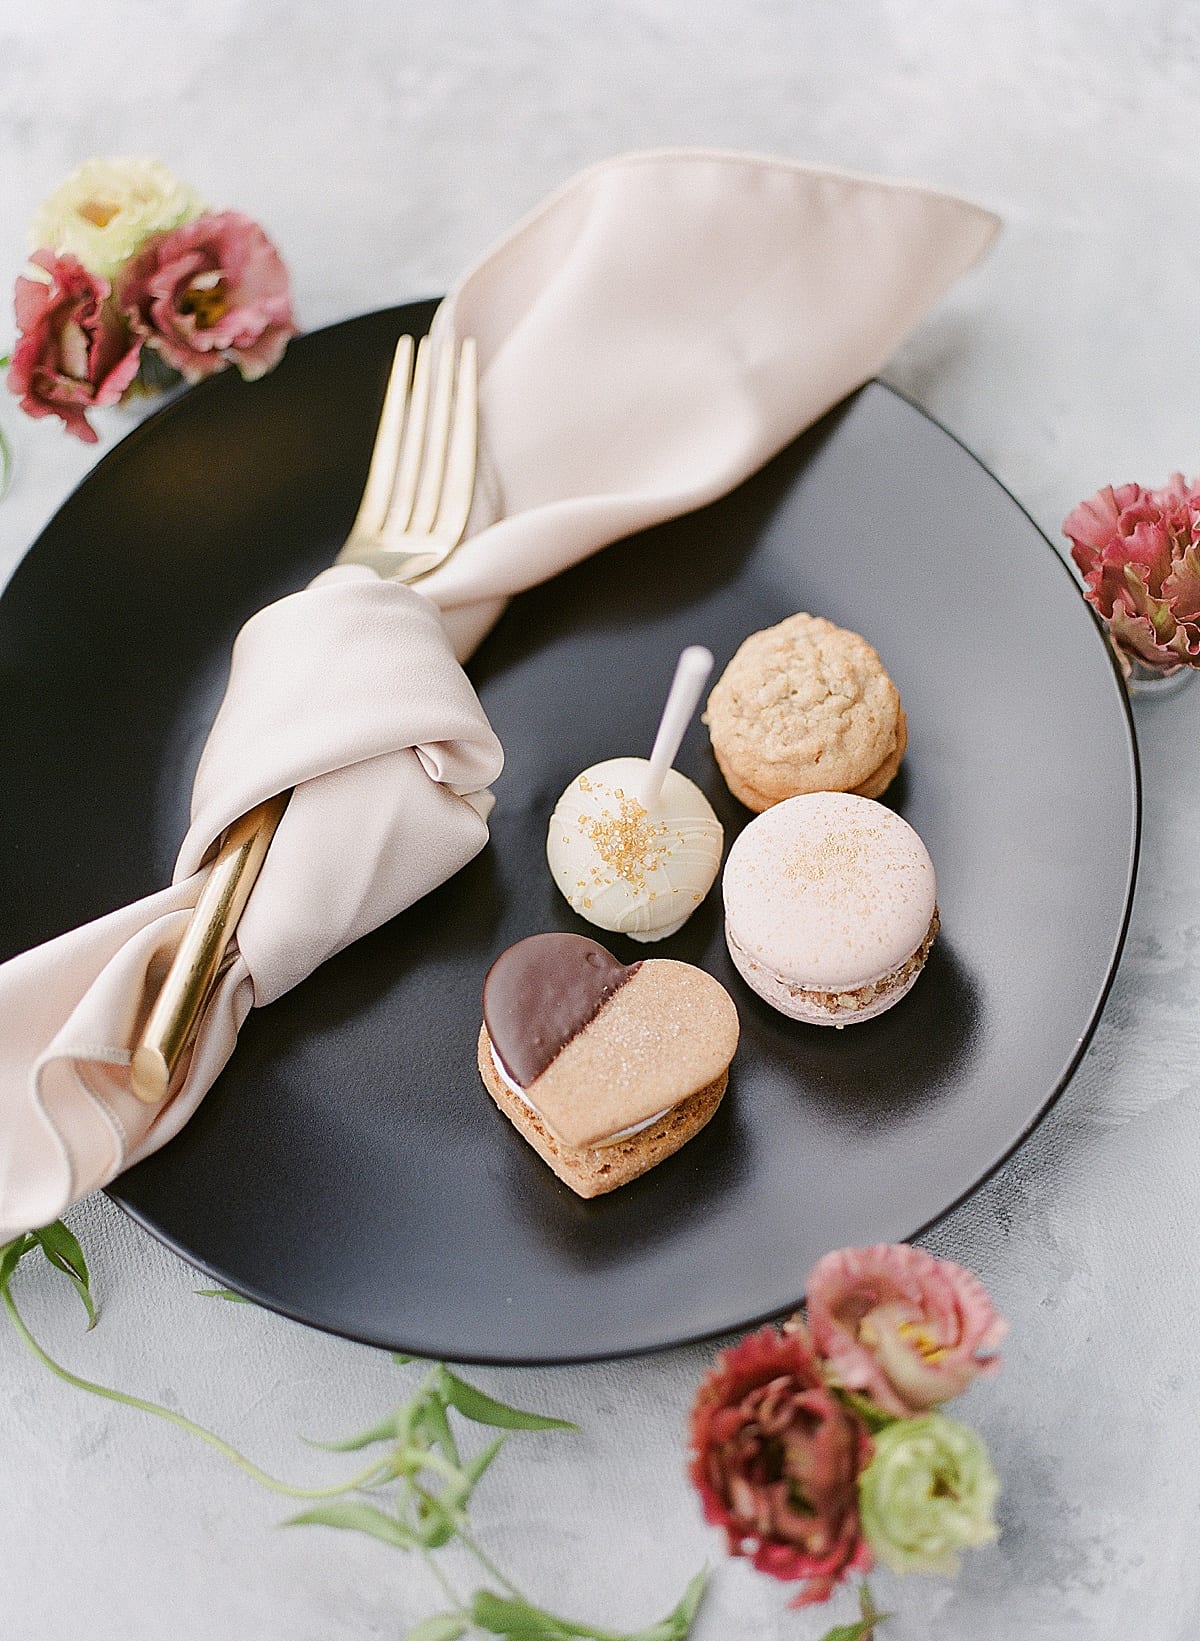 Cookies and Macaroons on Black Plate Detail for Bridal Shower Photo